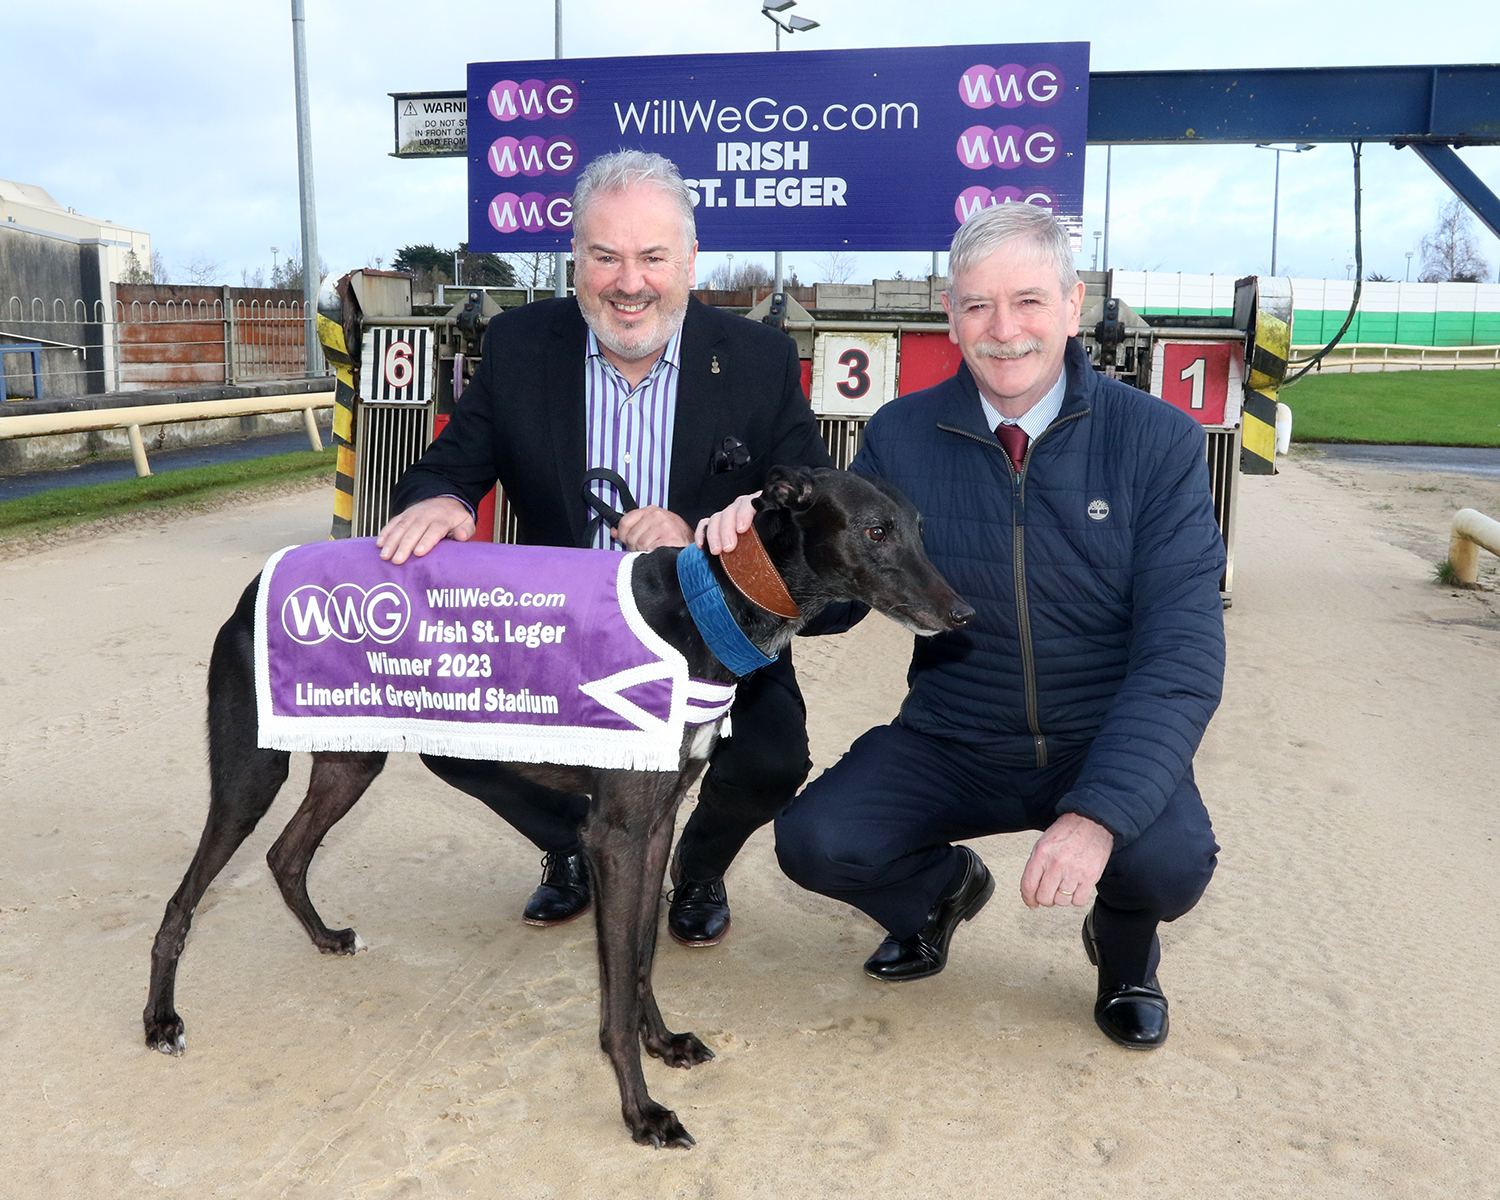 Ambassadog Sergio was joined by John Tuohey (CFO of Greyhound Racing Ireland) and Ray Quinn (Head of Venues and Entertainment at WillWeGo.com) to promote the final of the WillWeGo.com Irish St Leger this Saturday.